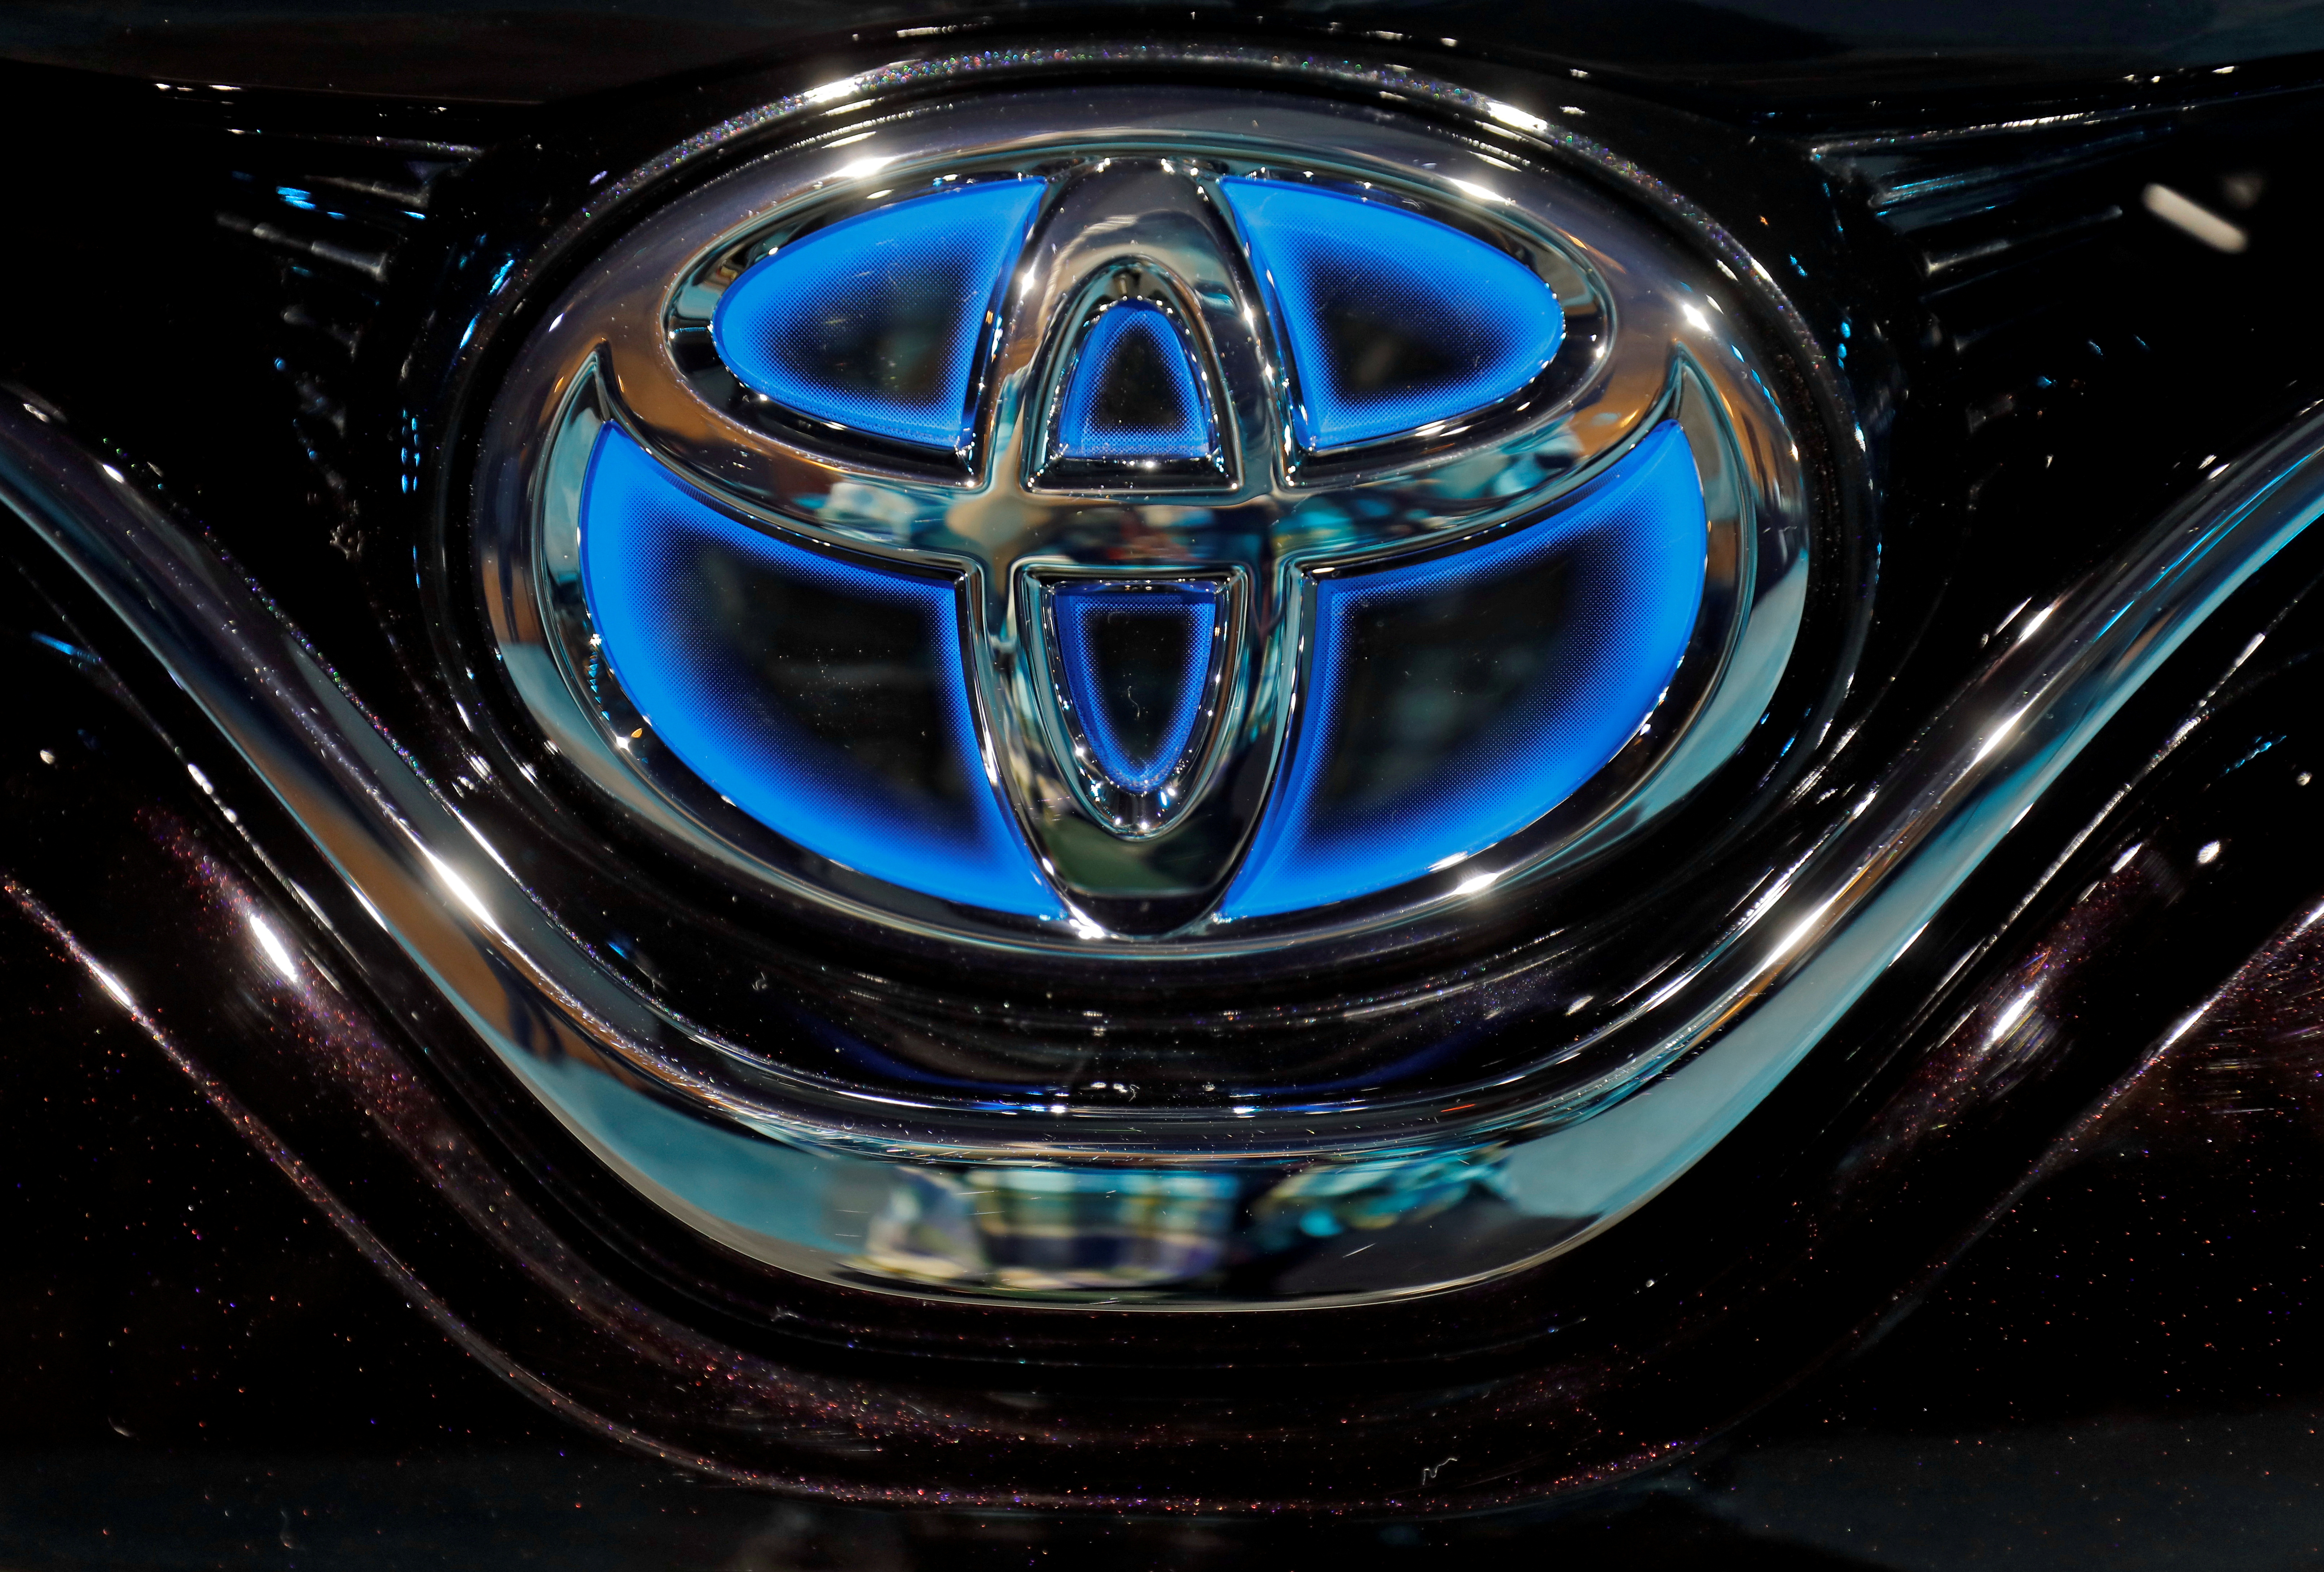 The Toyota logo is seen on the bonnet of a newly launched Camry Hybrid electric vehicle at a hotel in New Delhi